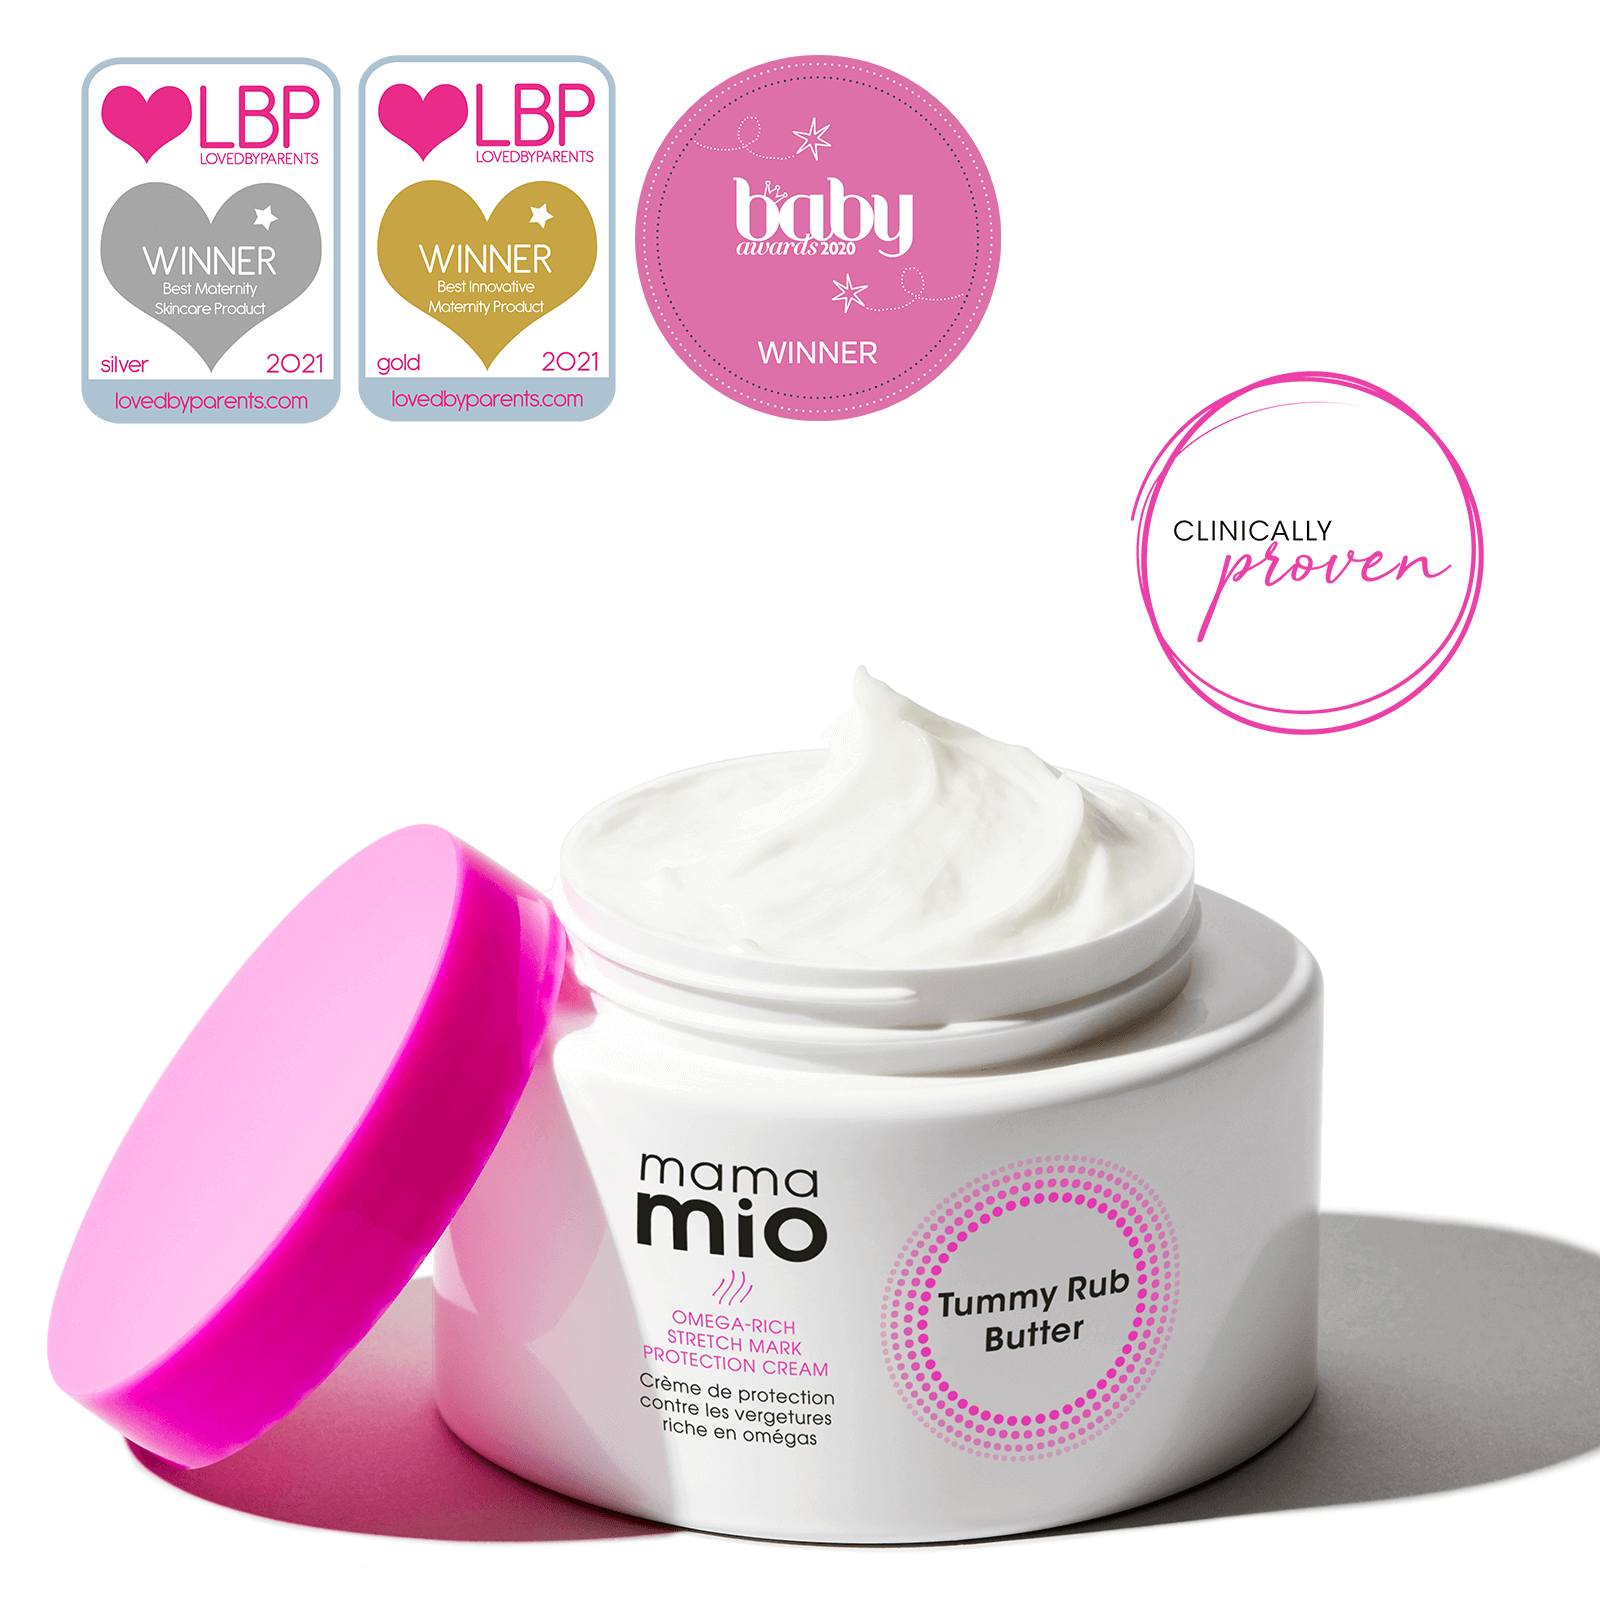 Tummy Rub Butter. Lovedbyparents Best Maternity Skincare Product 2021. Lovedbyparents Best Innovative Maternity Product 2021. Baby Awards 2020 Winner.